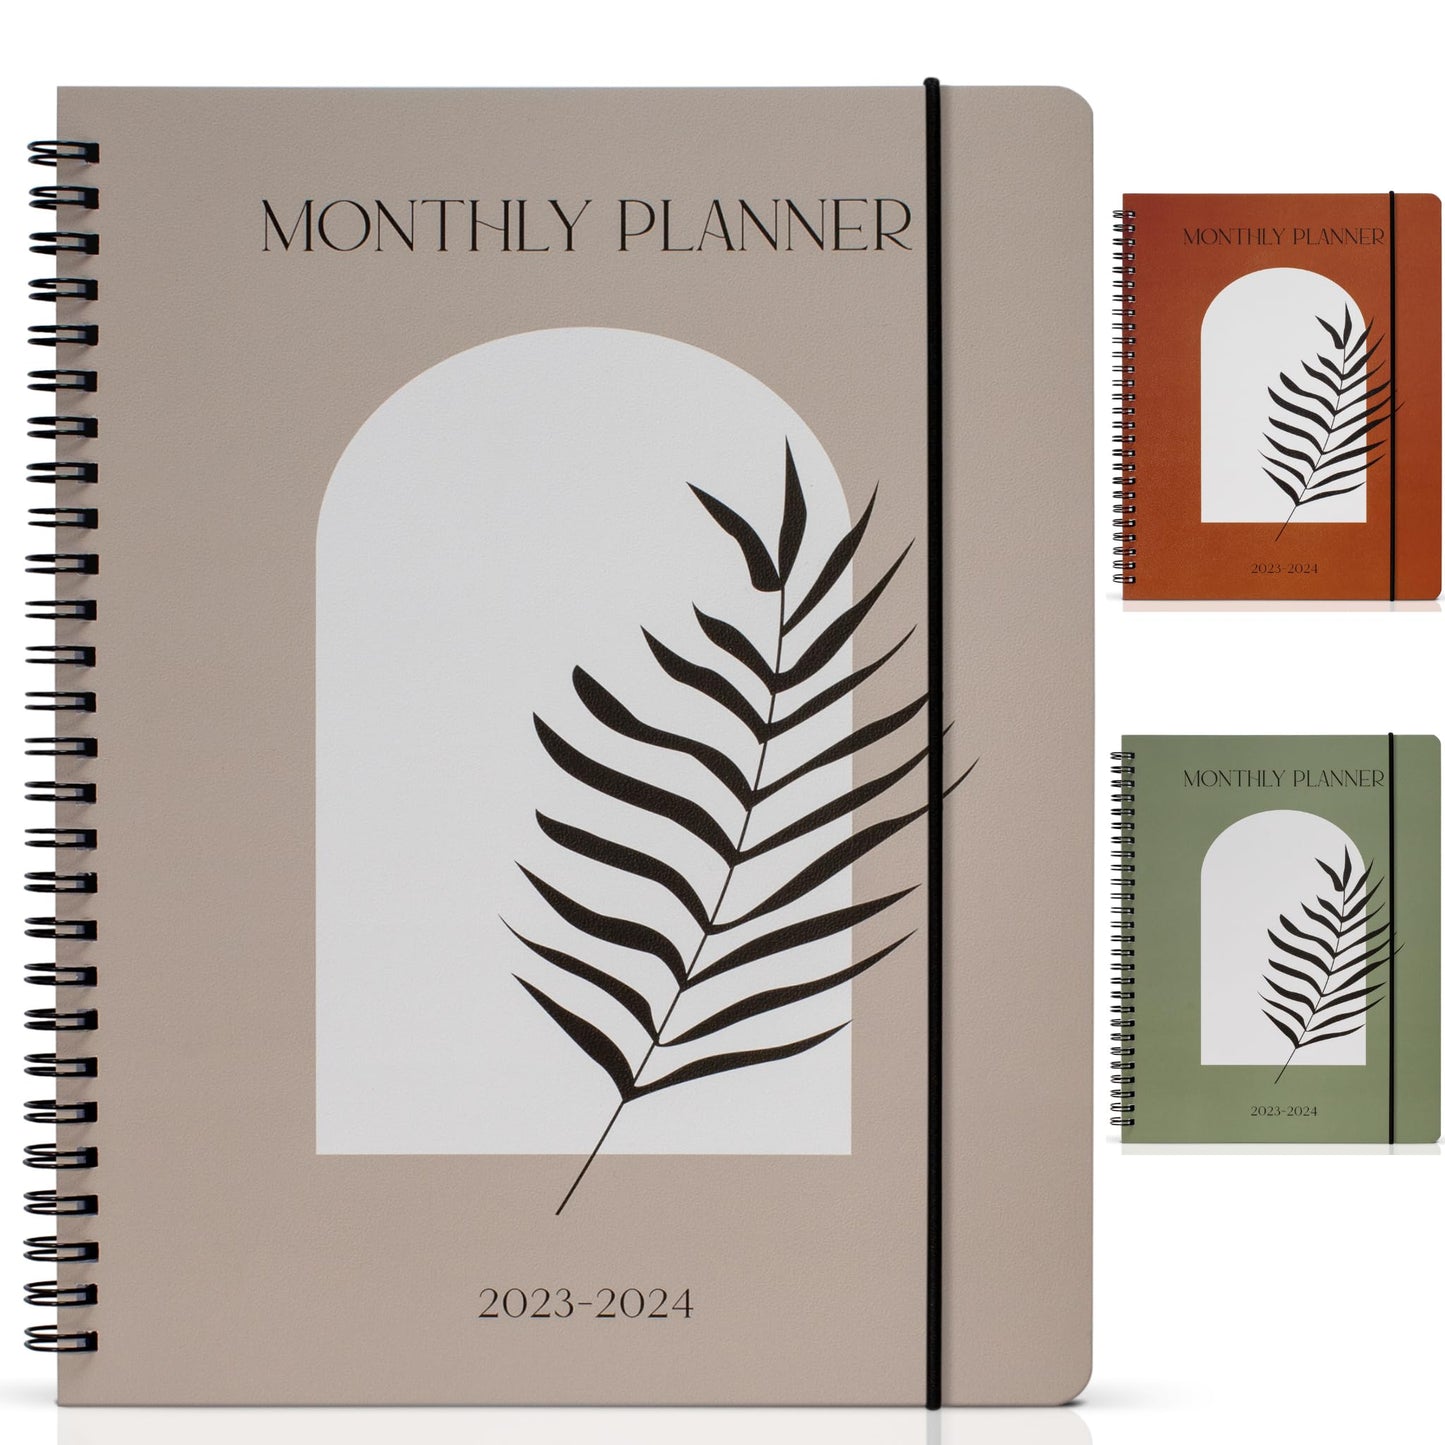 Simplified 2024 Monthly Planner and Calendar Book - Beautiful 2023-2024 To Do List Notebook For Women or Men - Easily Organizes Your Tasks to Boost Productivity - Runs Until December 2024